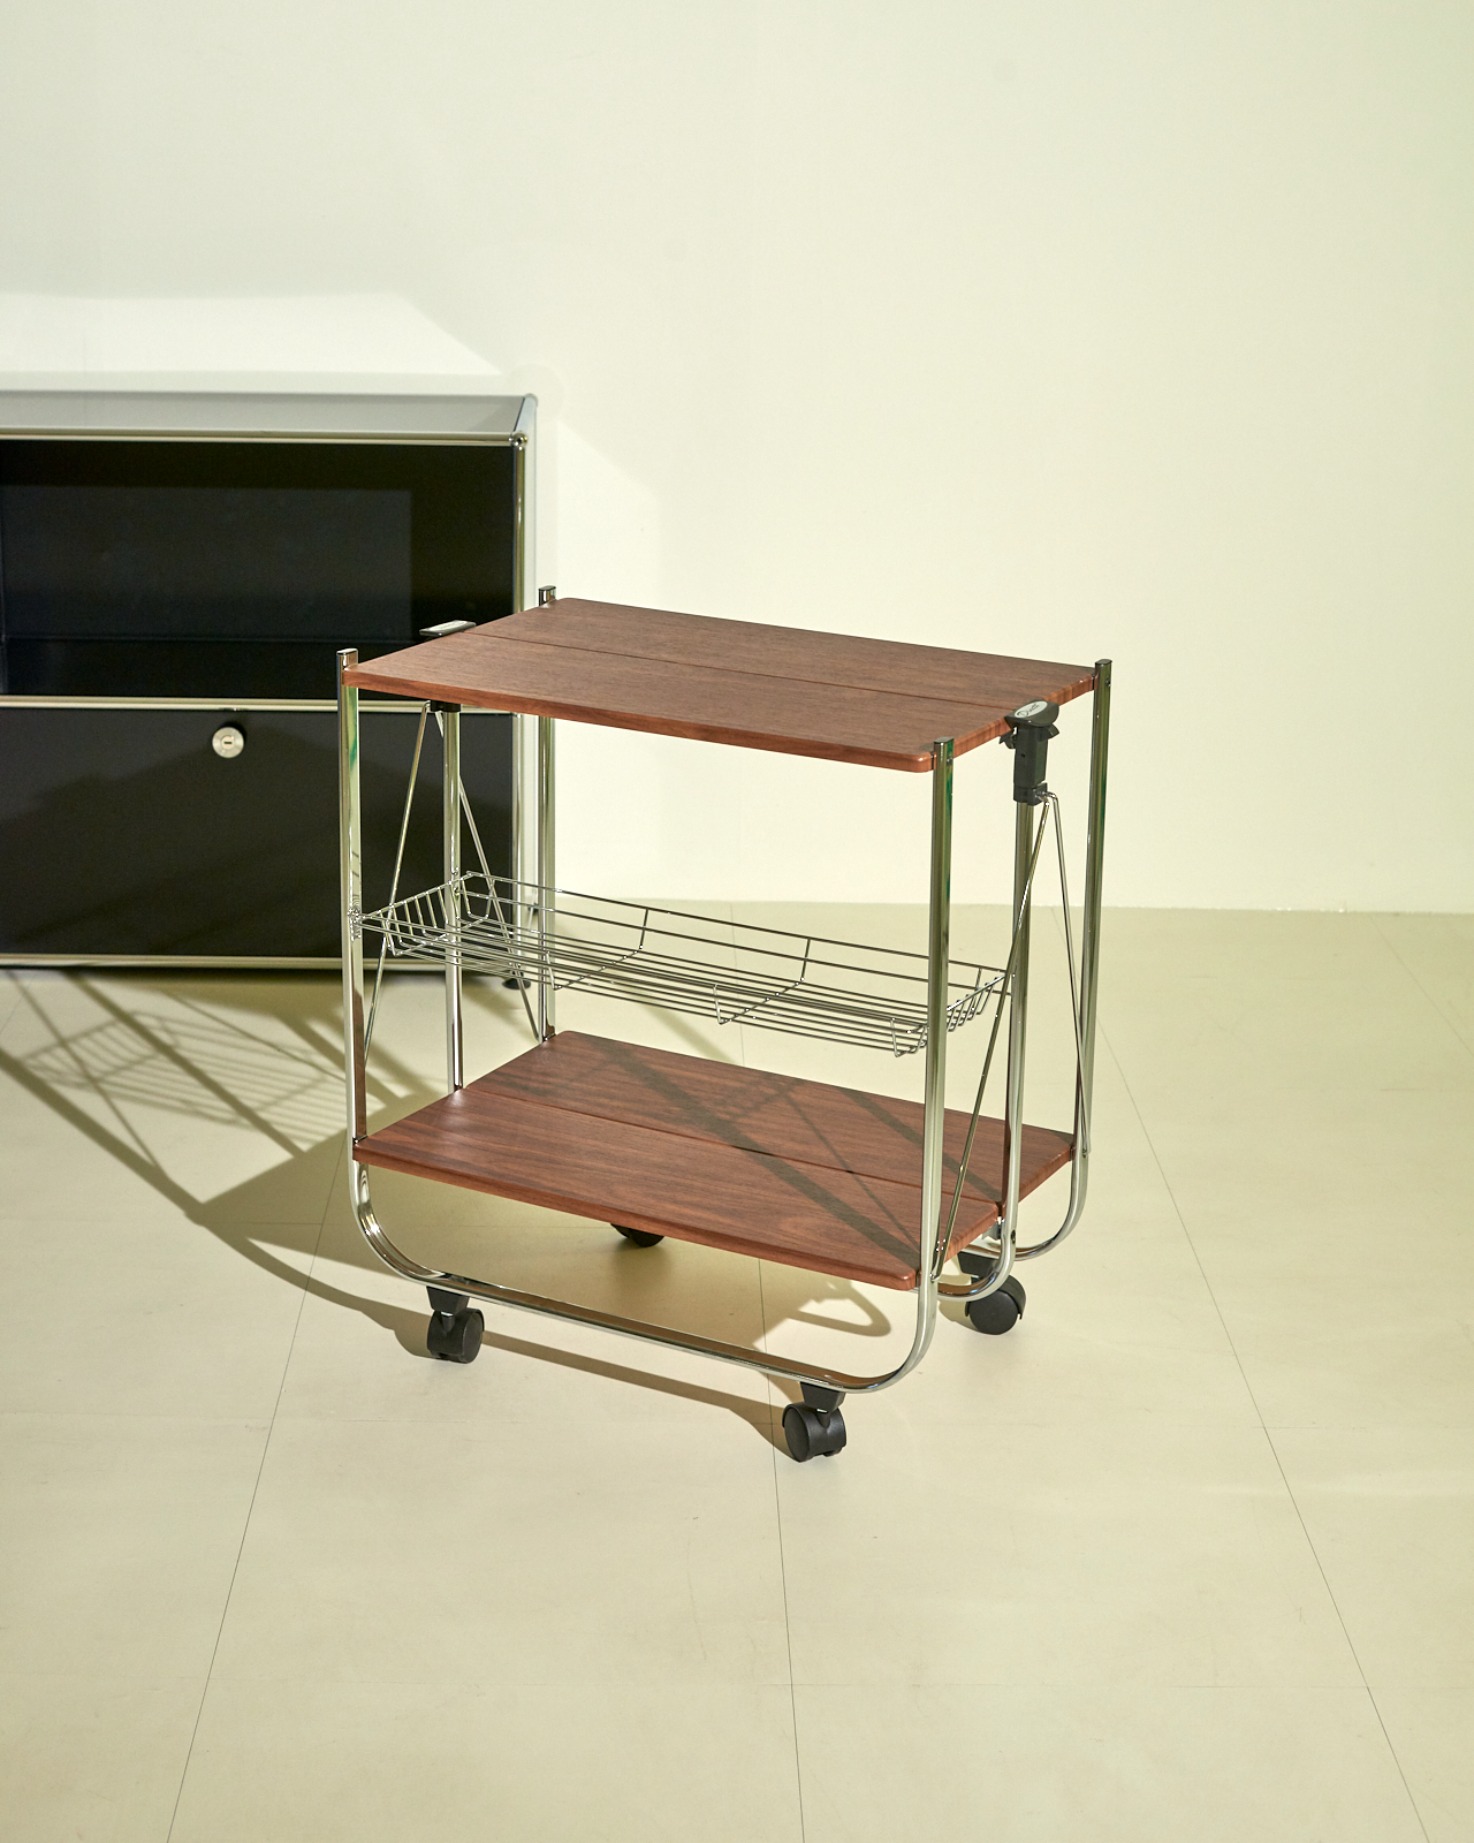 #585 / At - Home Trolley (wood pattern)